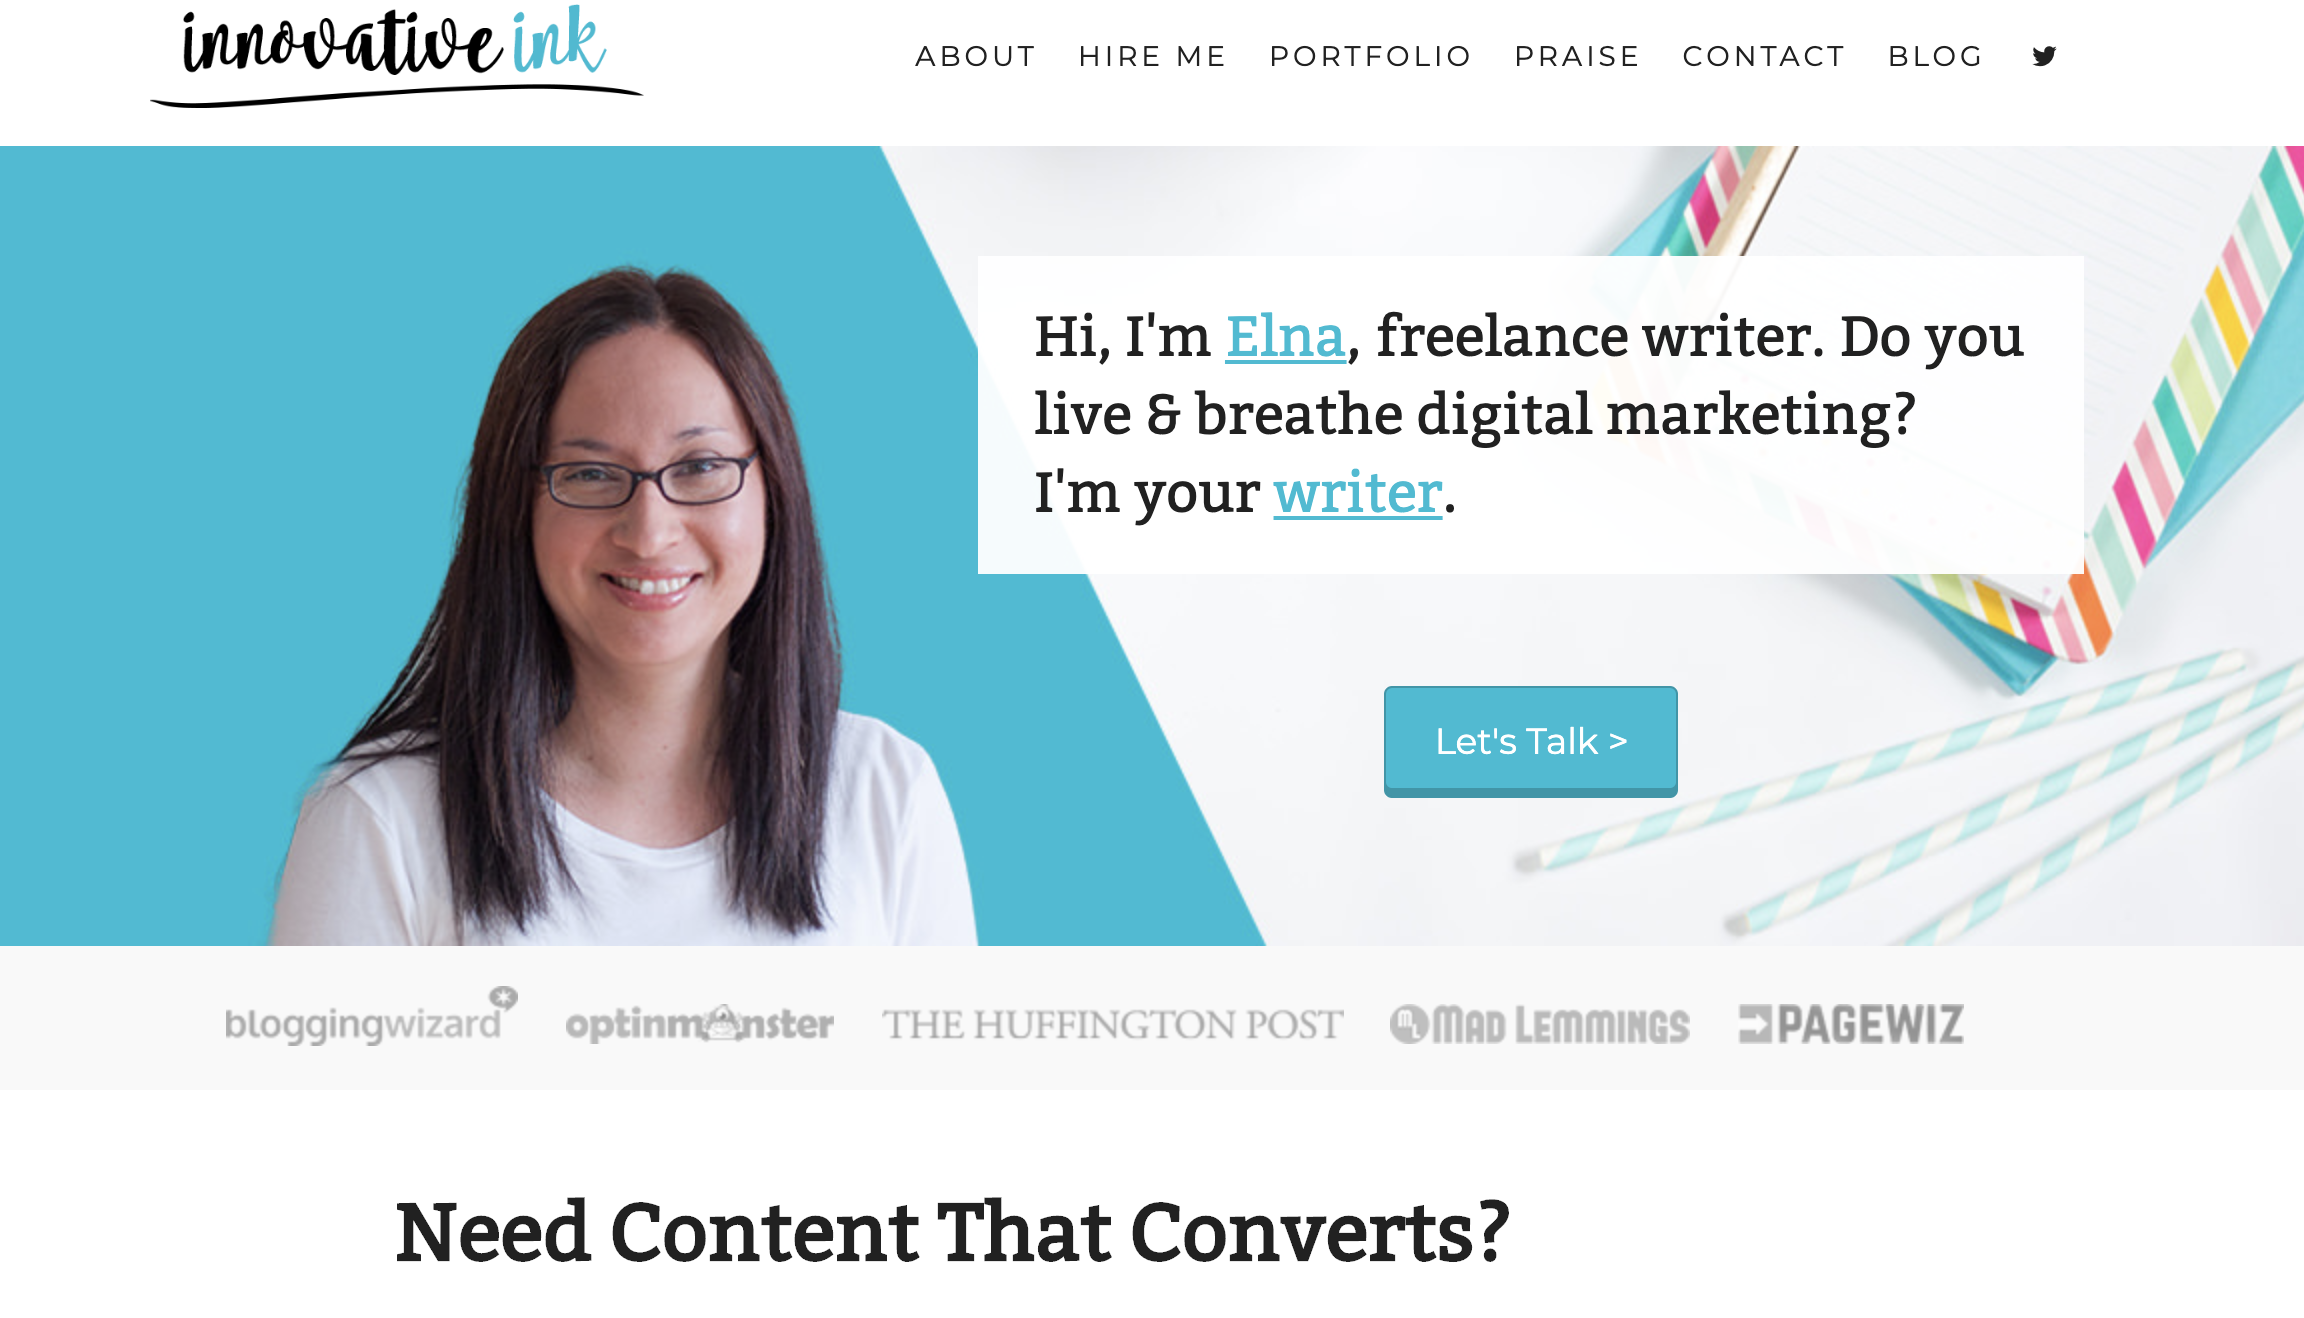  A headshot of a smiling woman with glasses on a blue background with text reading 'Innovative Ink. Hi, I'm Elna, freelance writer. Do you live and breathe digital marketing? I'm your writer. Let's talk.'